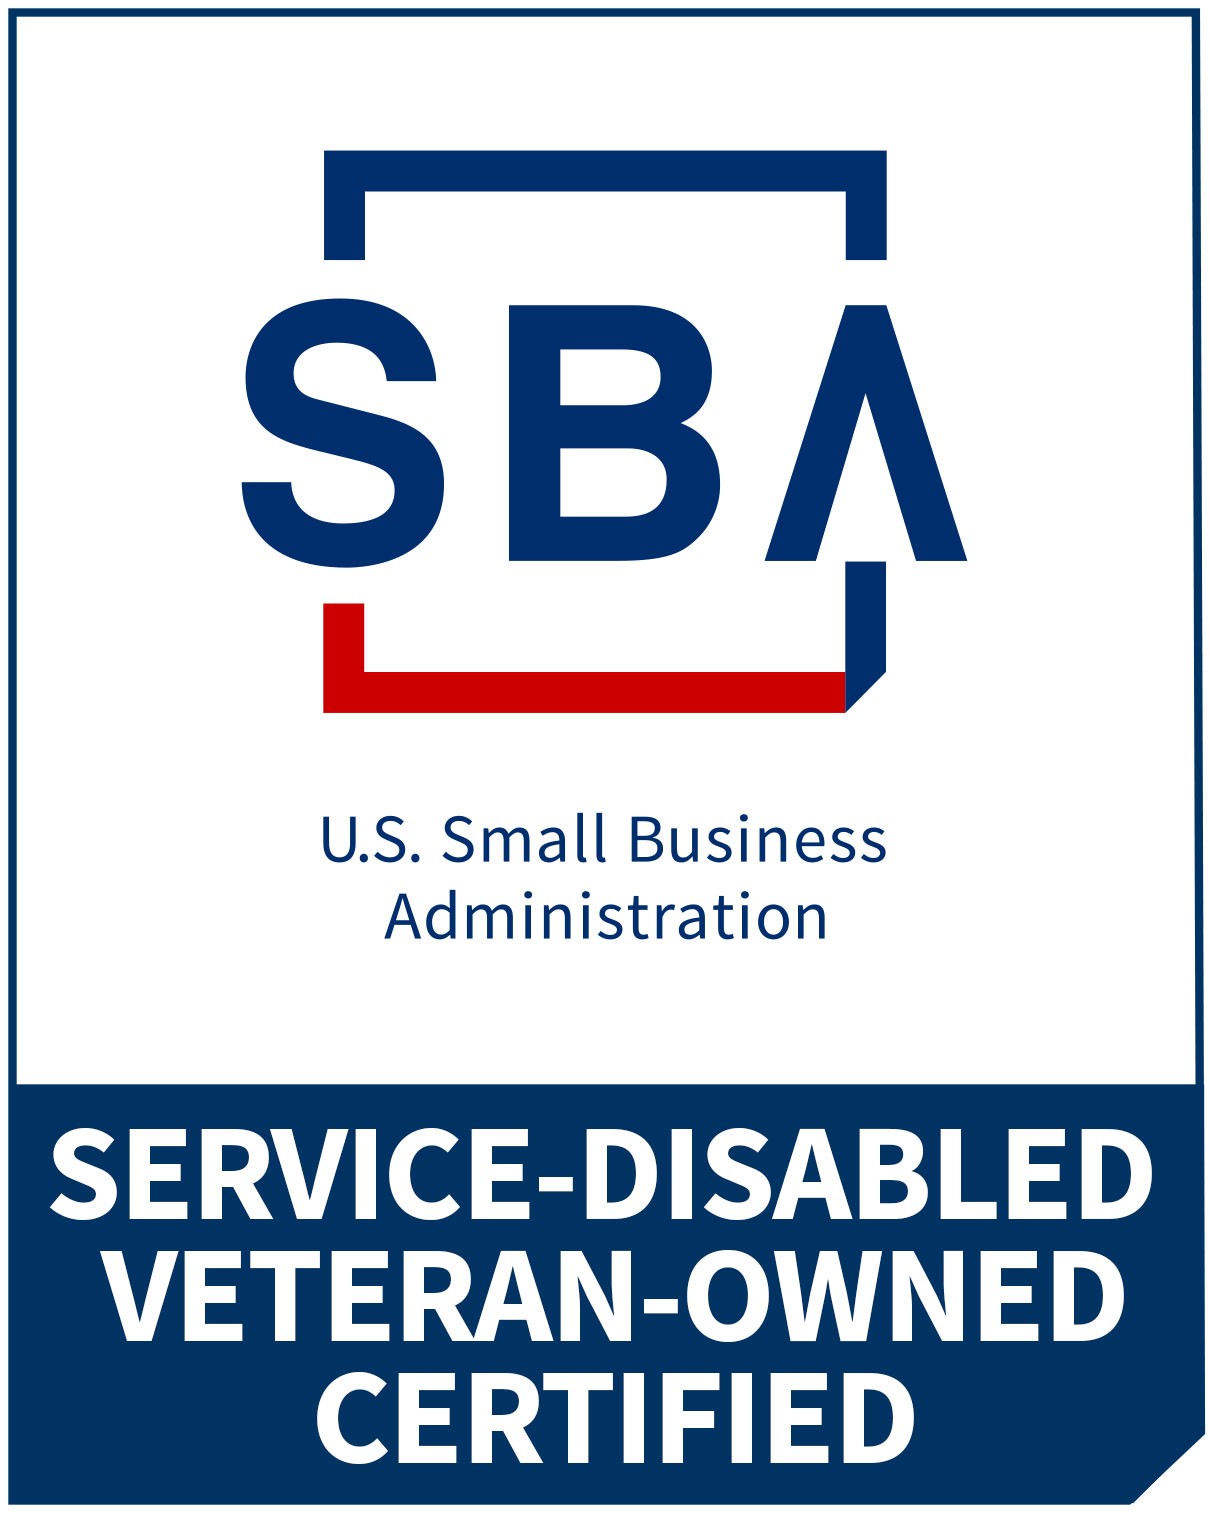 U.S. Small Business Administration servies